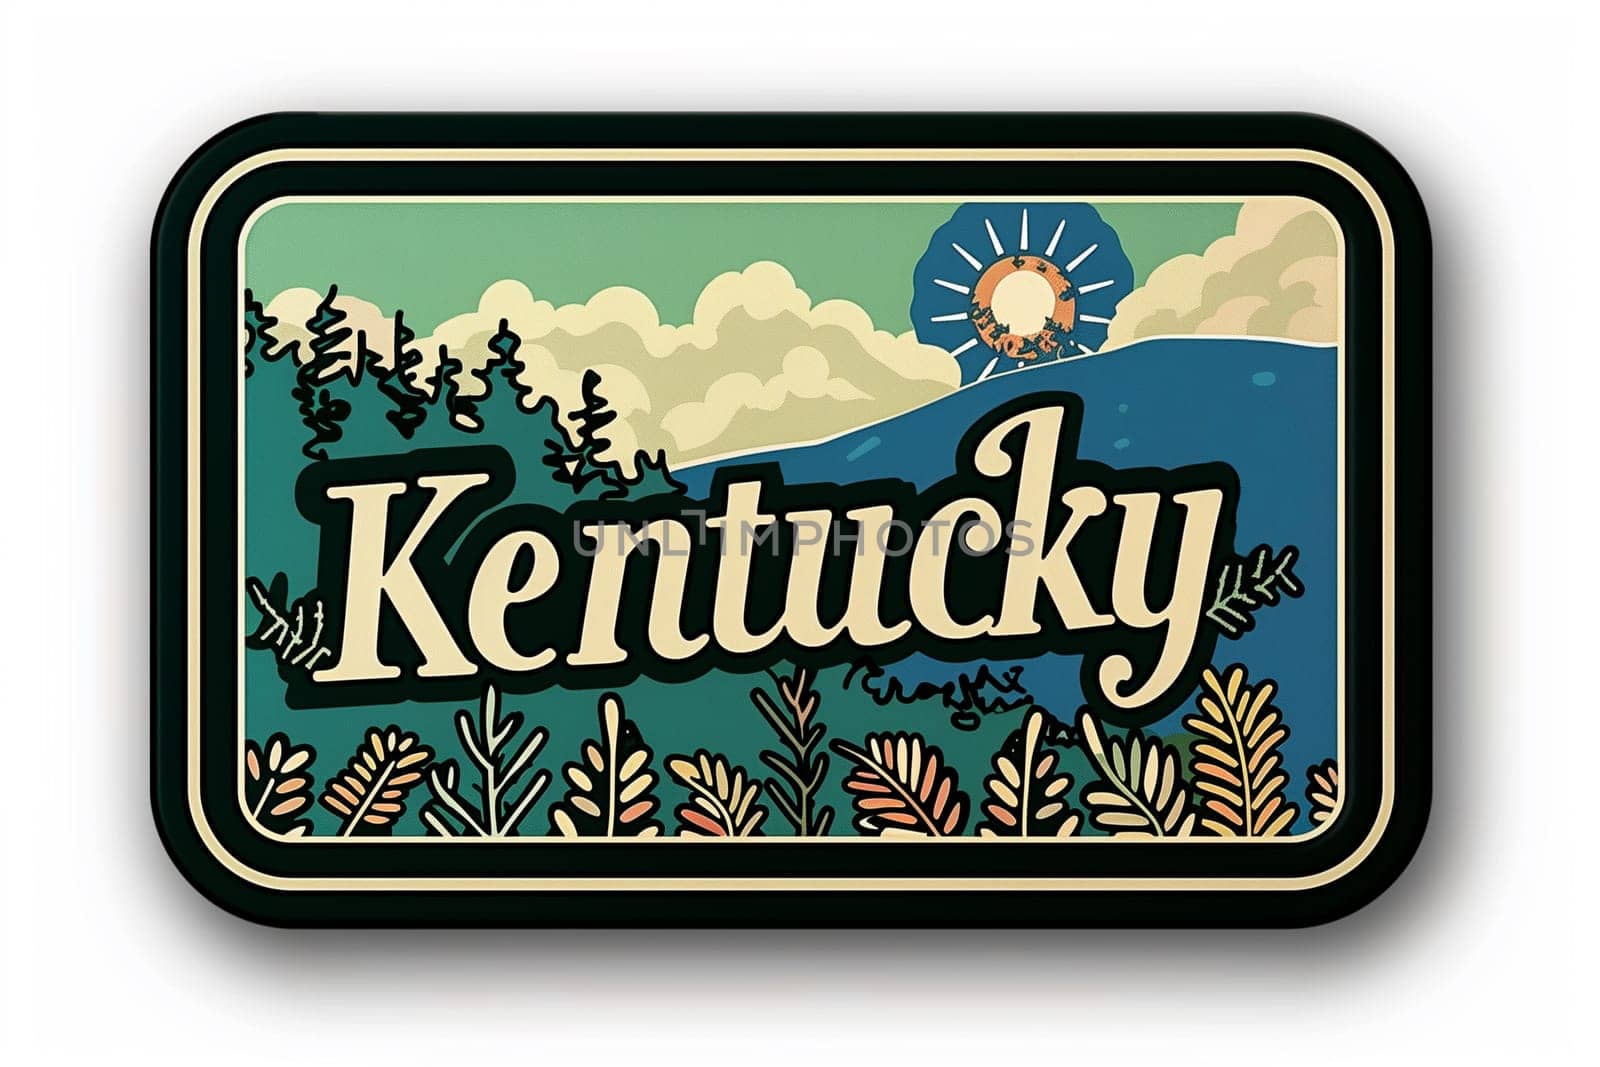 A Kentucky sign prominently featuring the word Kentucky on it.